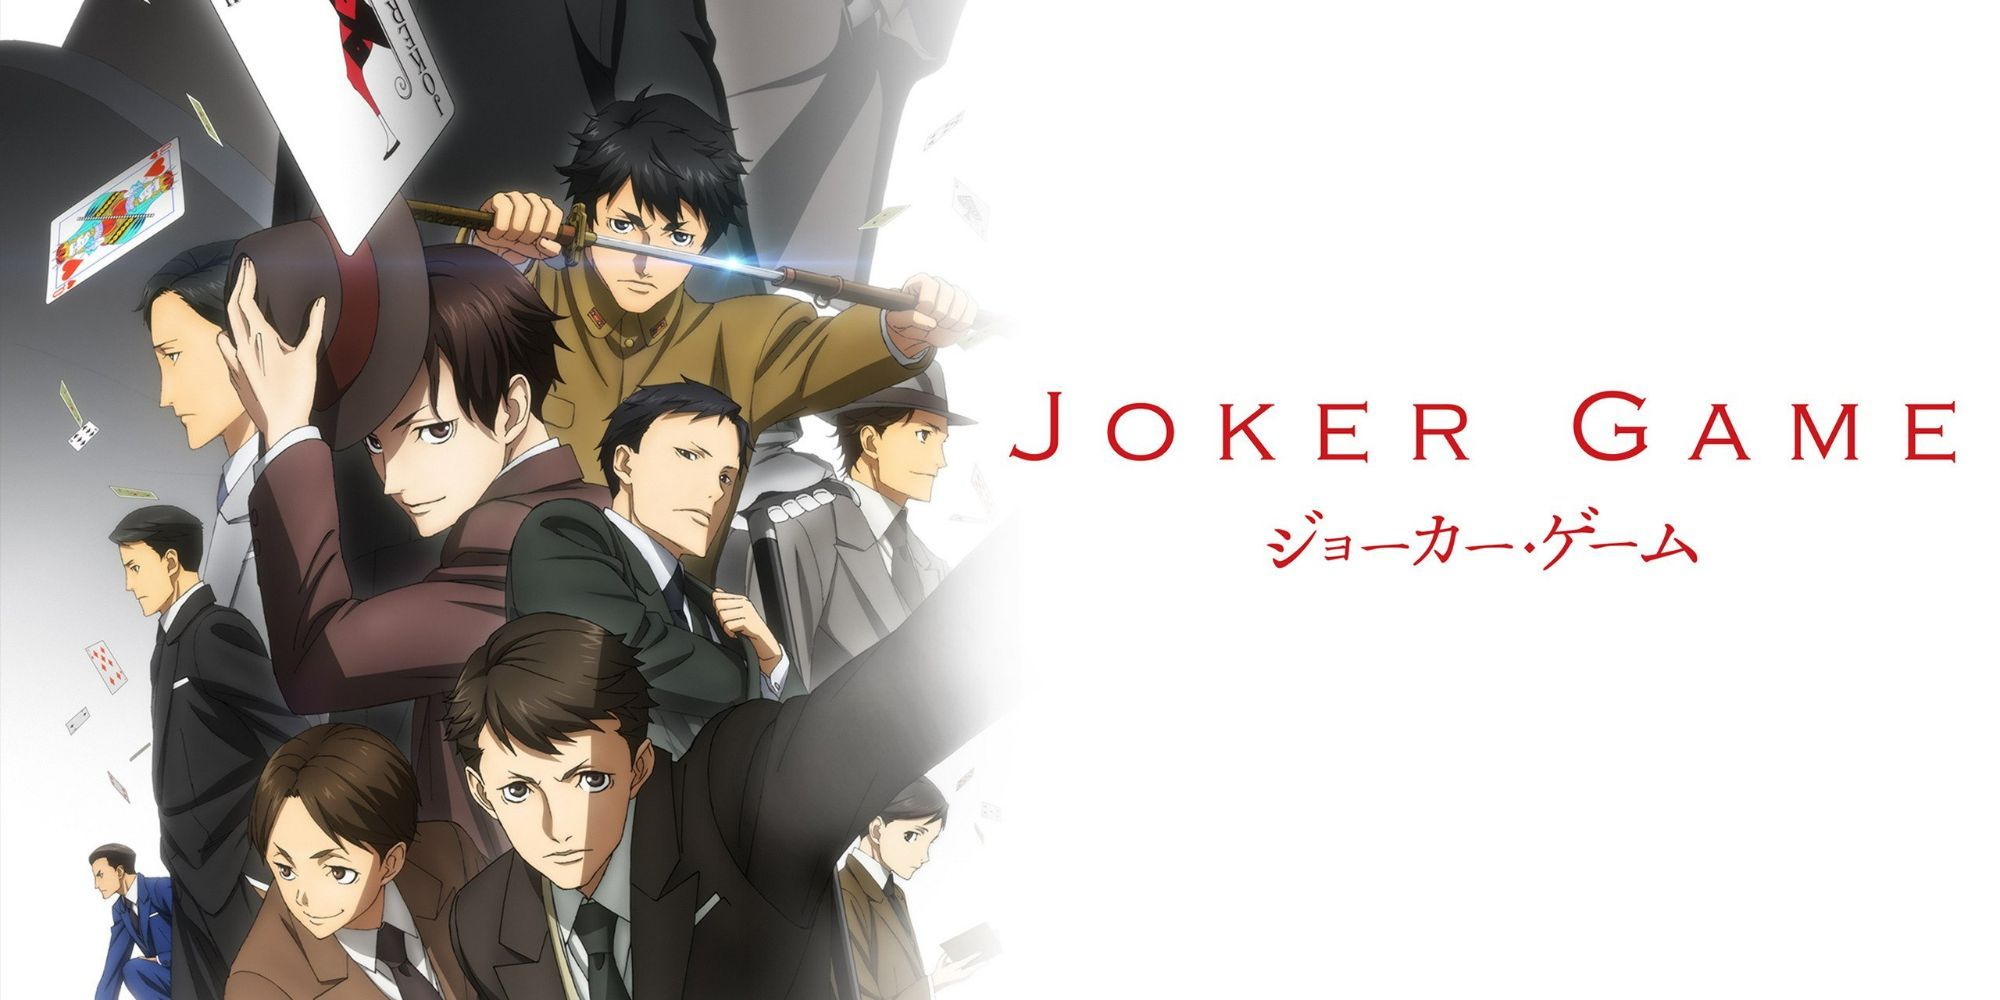 Title card for Joker Game featuring its main characters